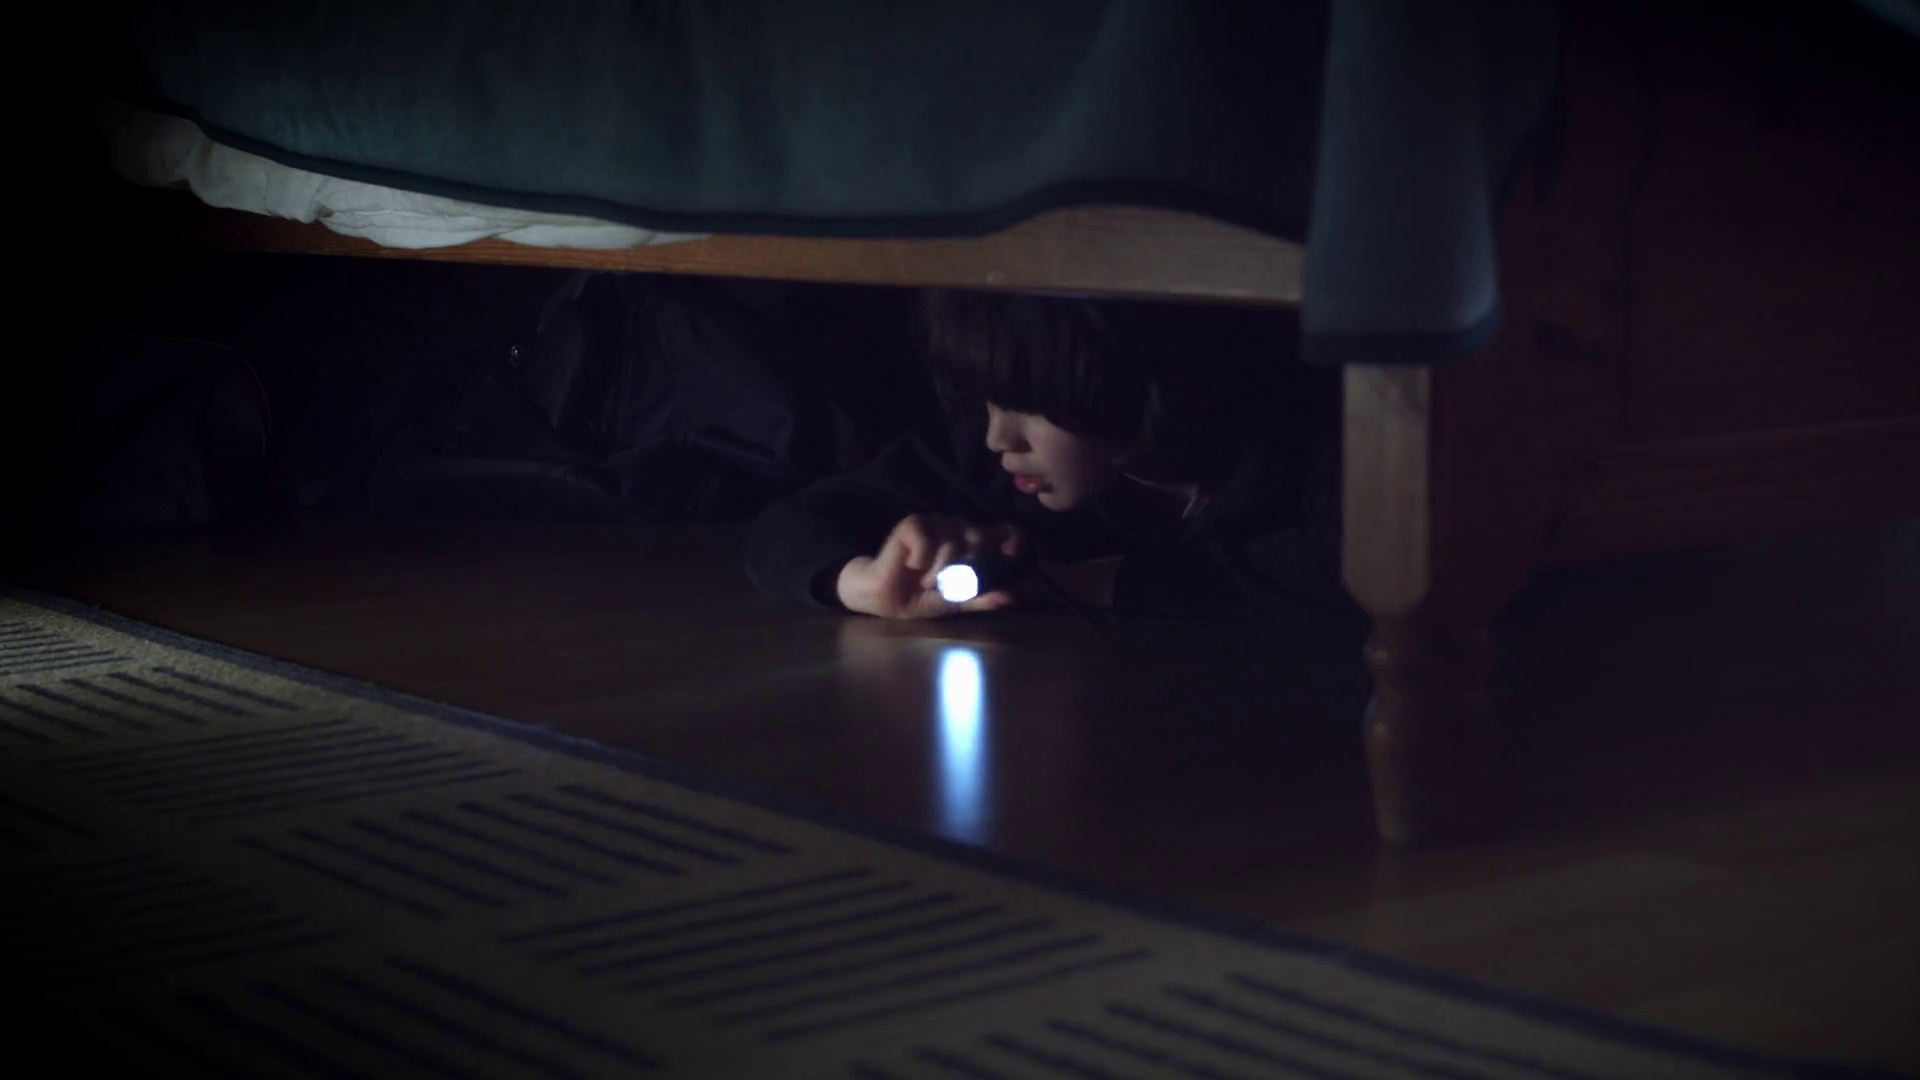 Hid under the bed